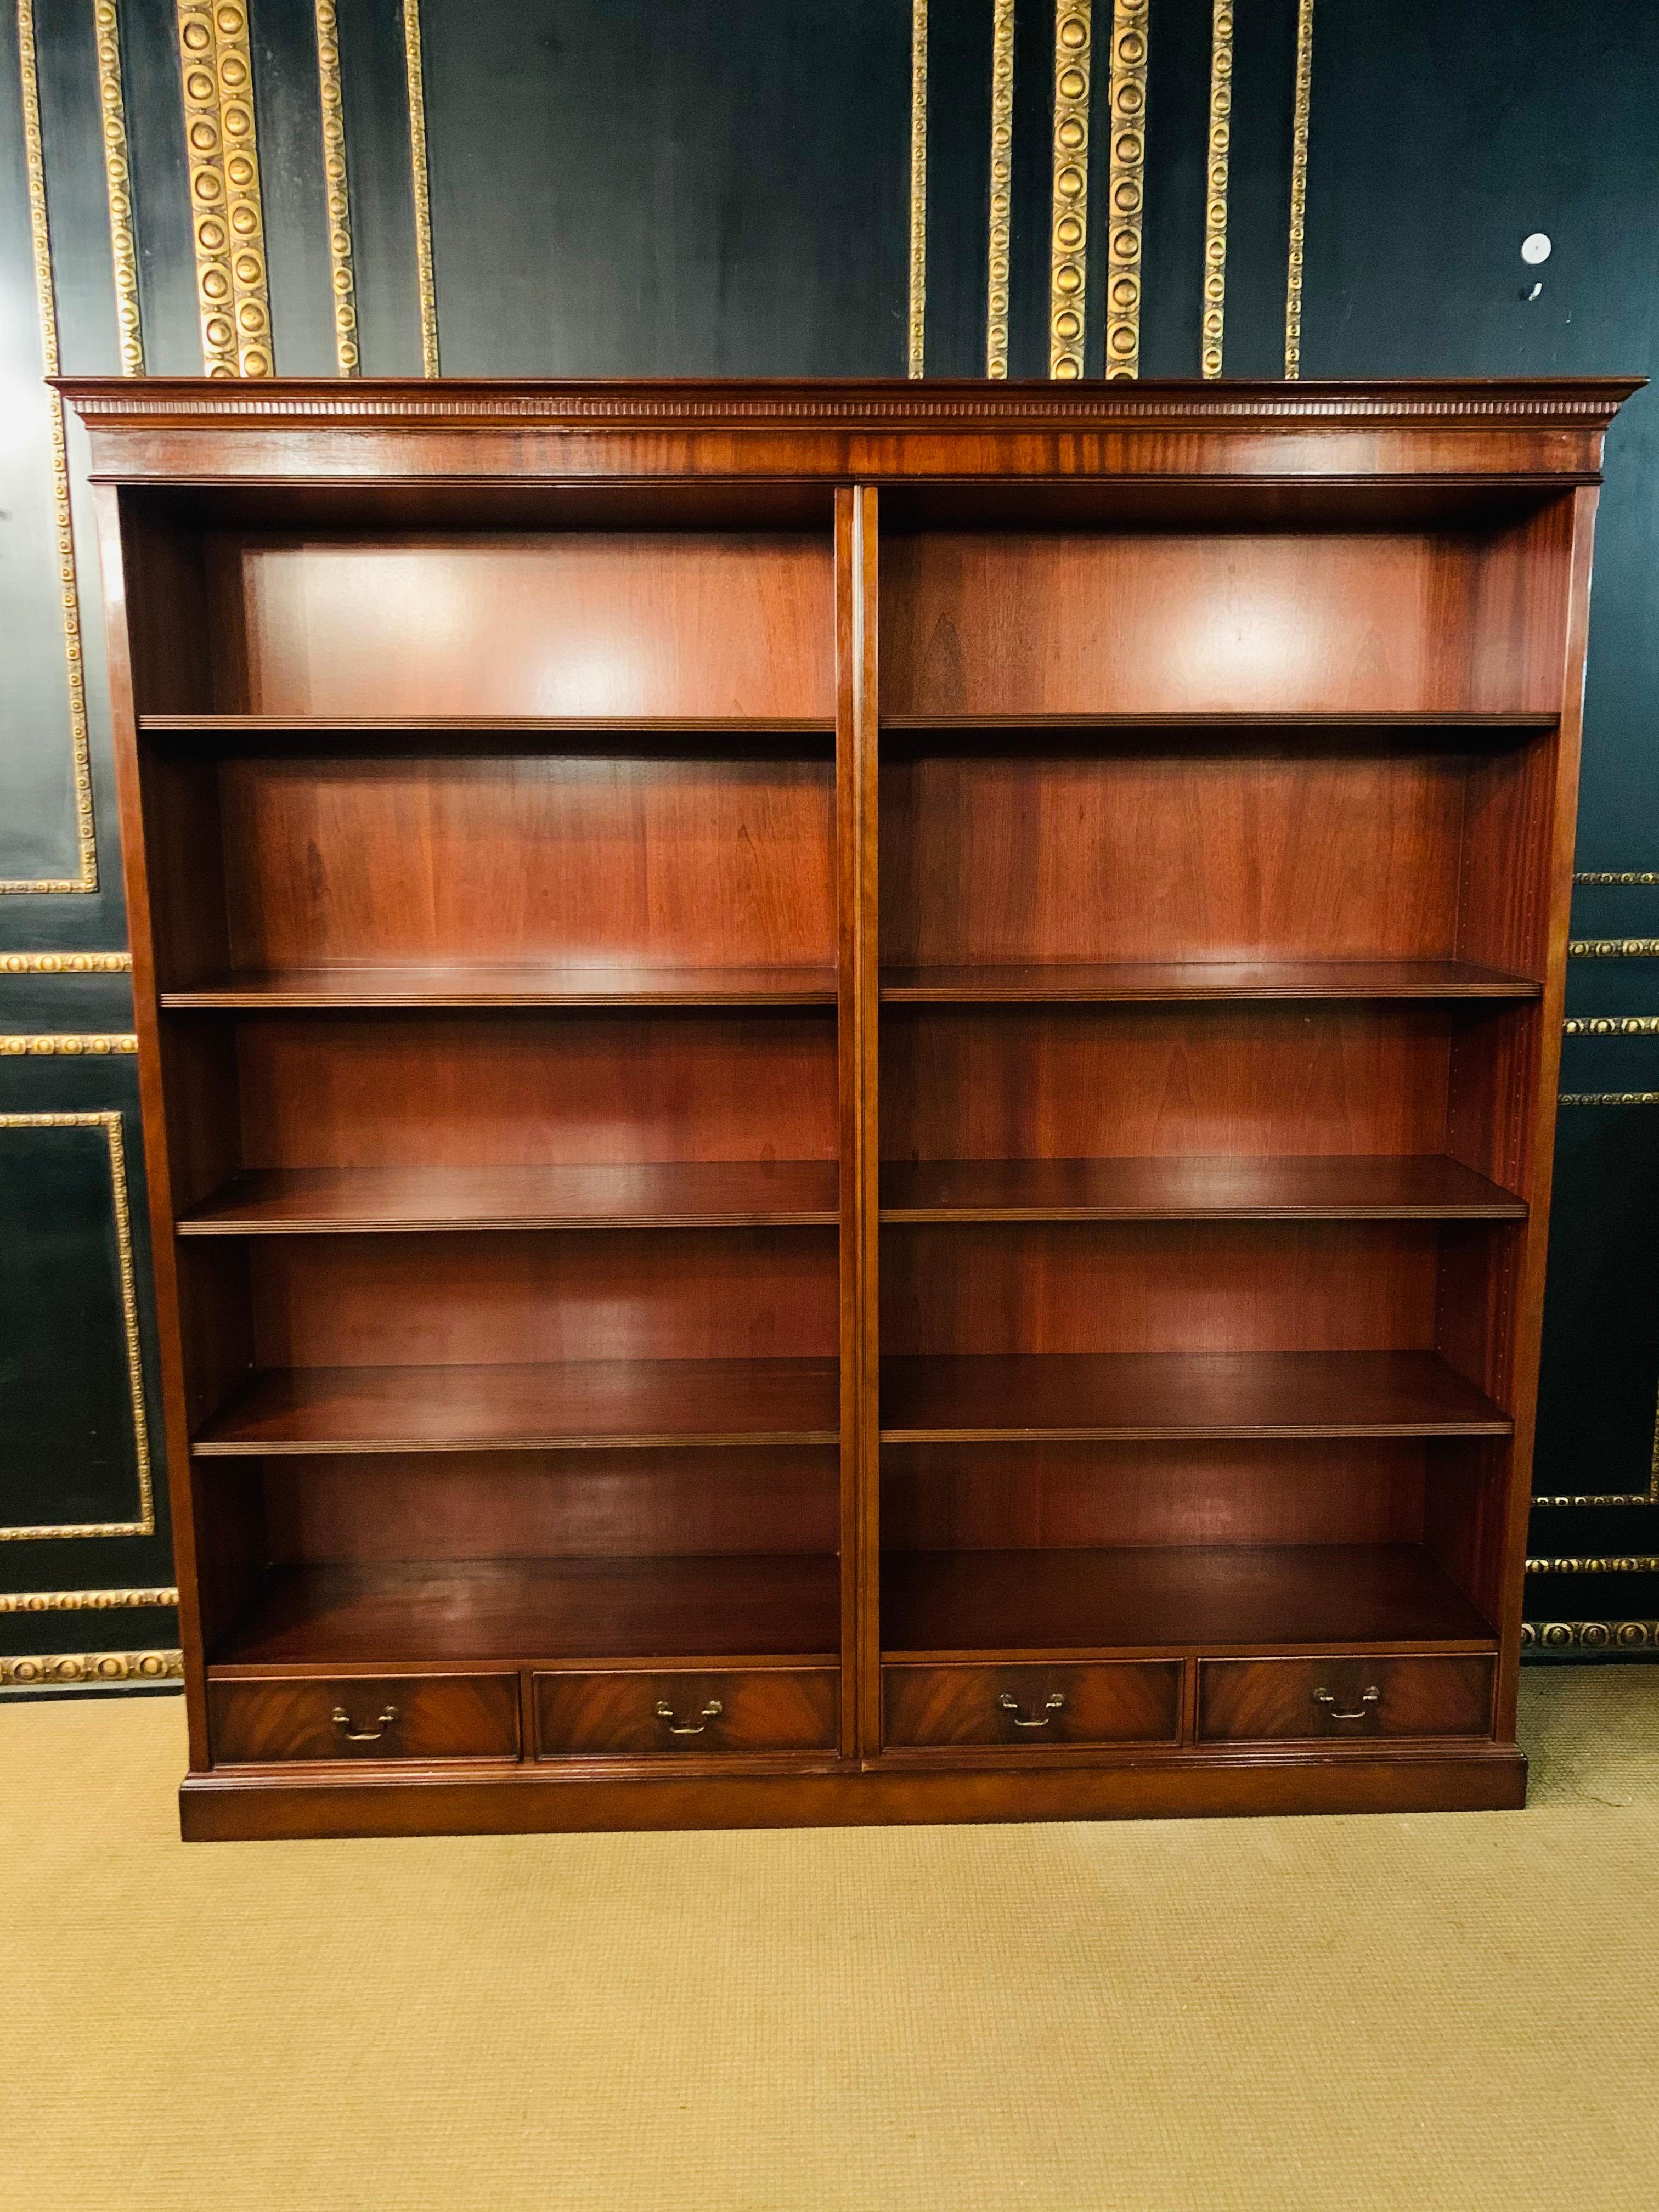 We are delighted to offer this lovely vintage stained mahogany library bookcase a good looking and well made bookcase, its mahogany and very English country house. The frame splits into four easy to transport pieces, you have the base plinth, two